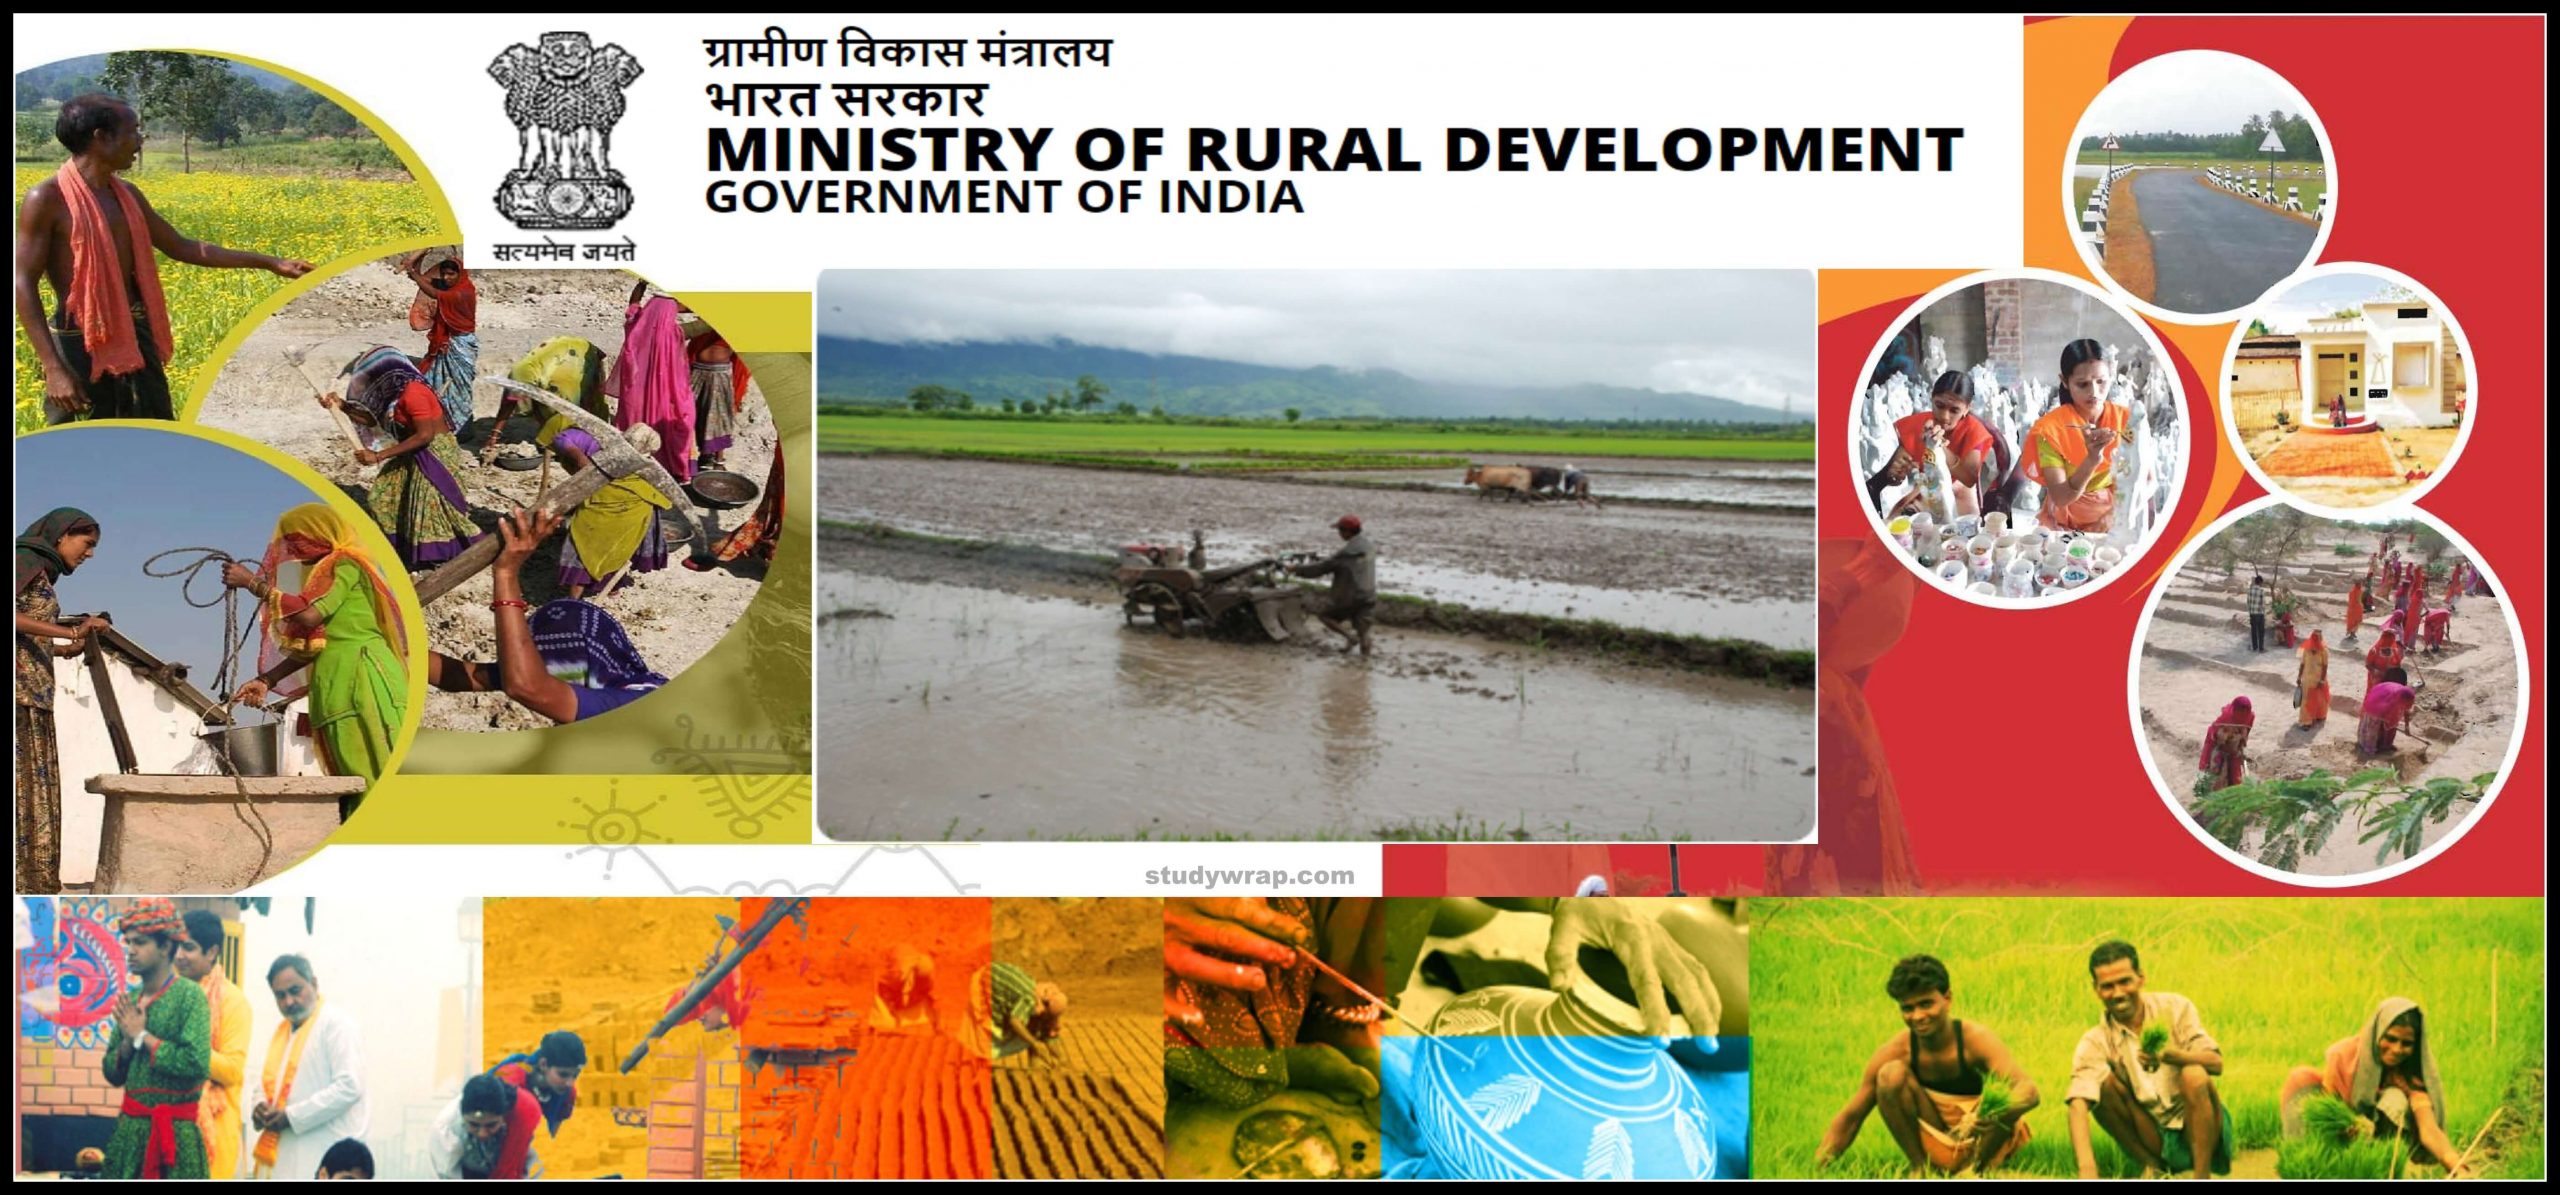 a case study of rural development programmes in india